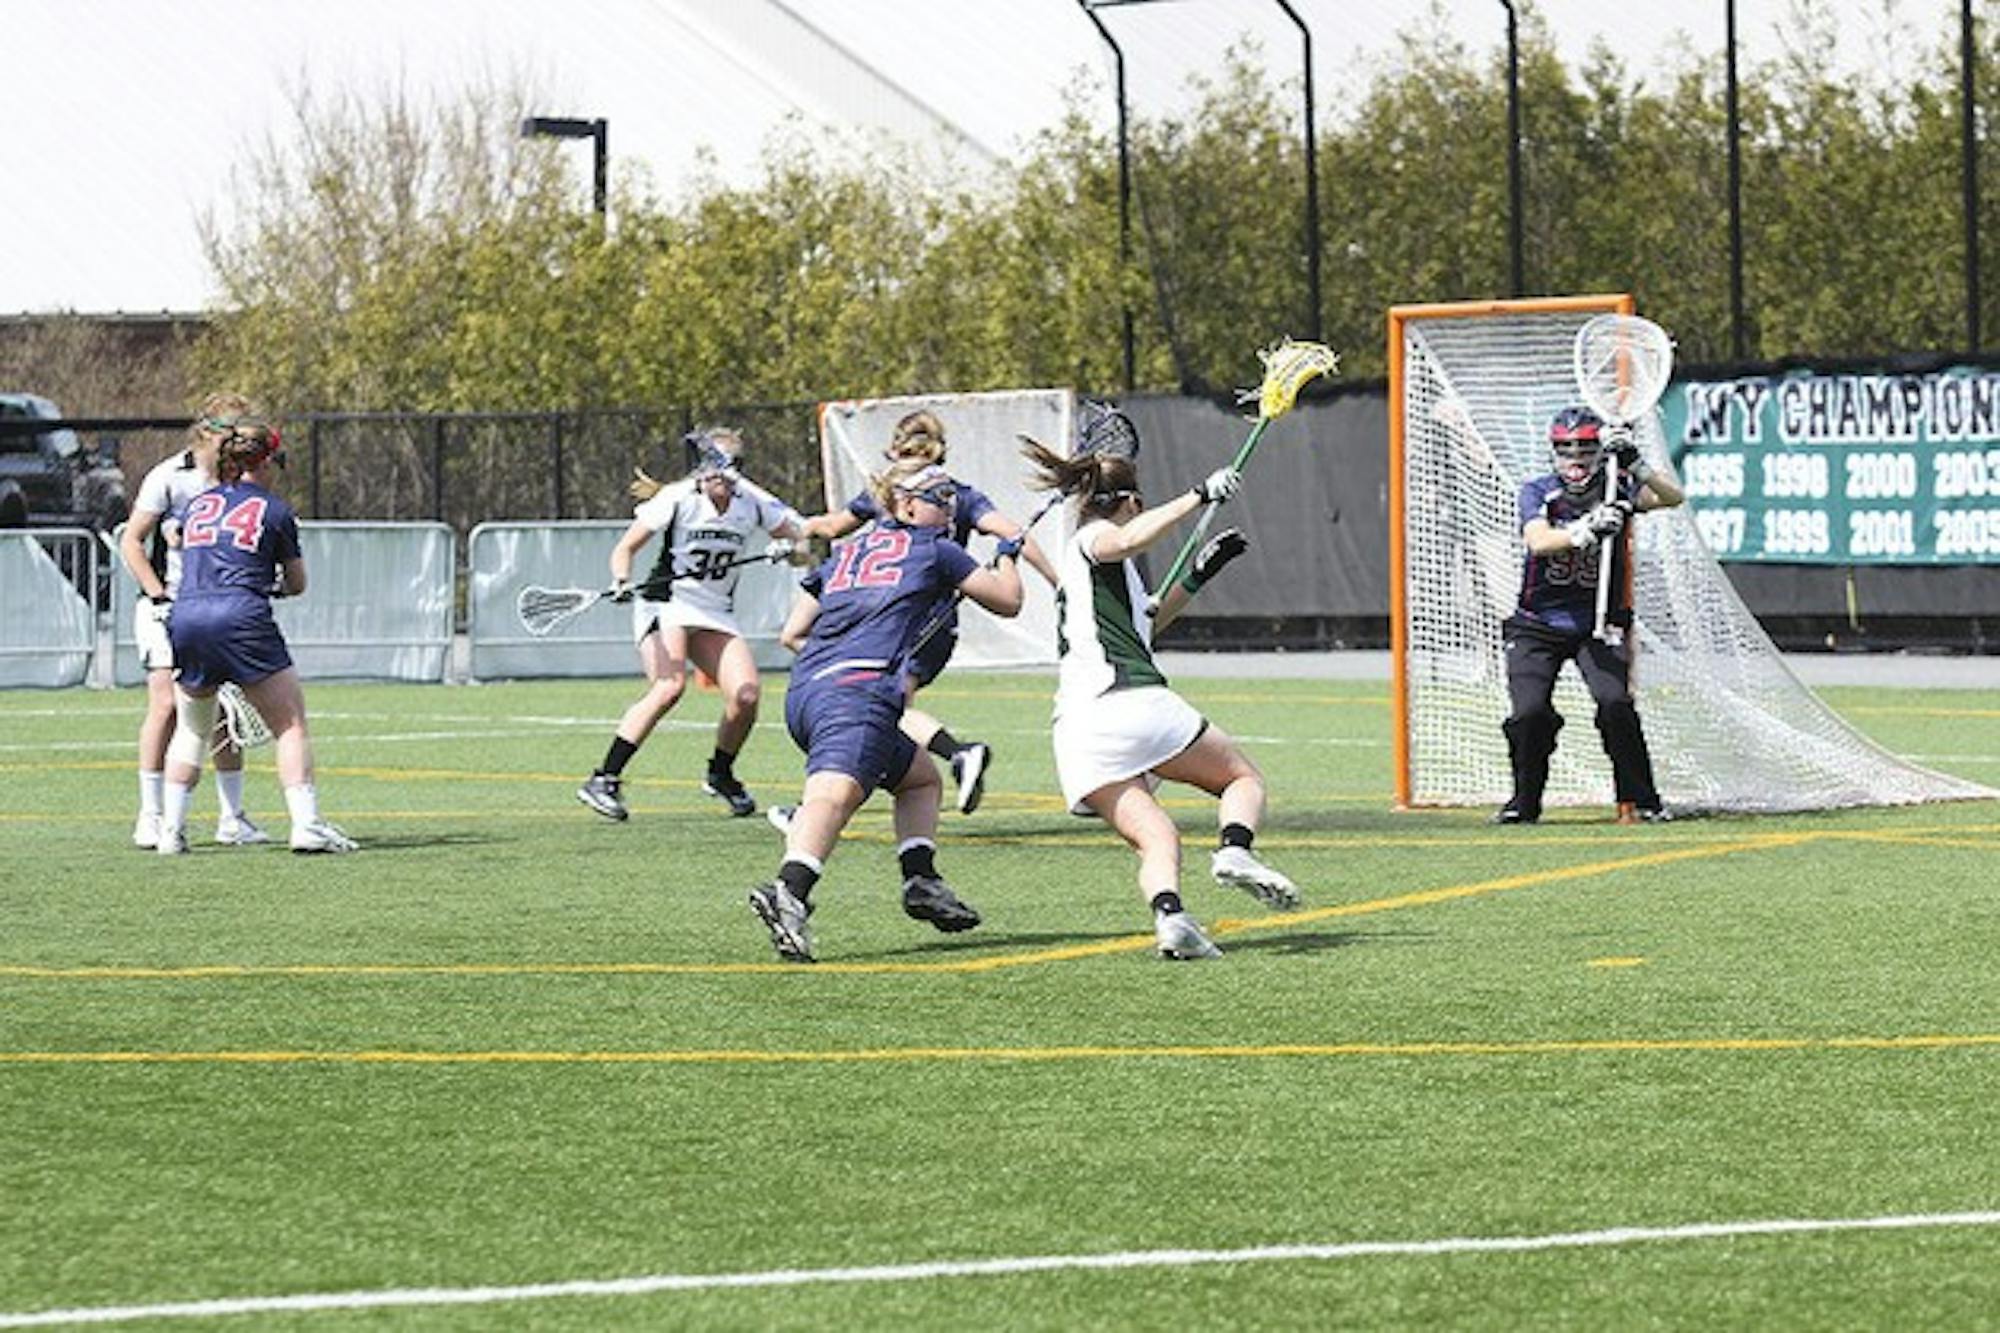 With its 7-5 loss to Harvard University, the women's lacrosse team will have to travel to Philadelphia next weekend for the Ivy League Tournament.